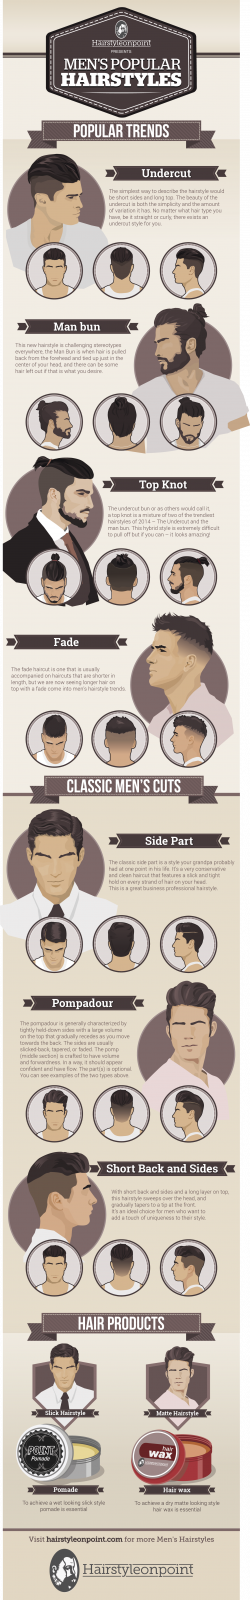 Utmost Hairstyles for Men with Names Visions - Feilong.US